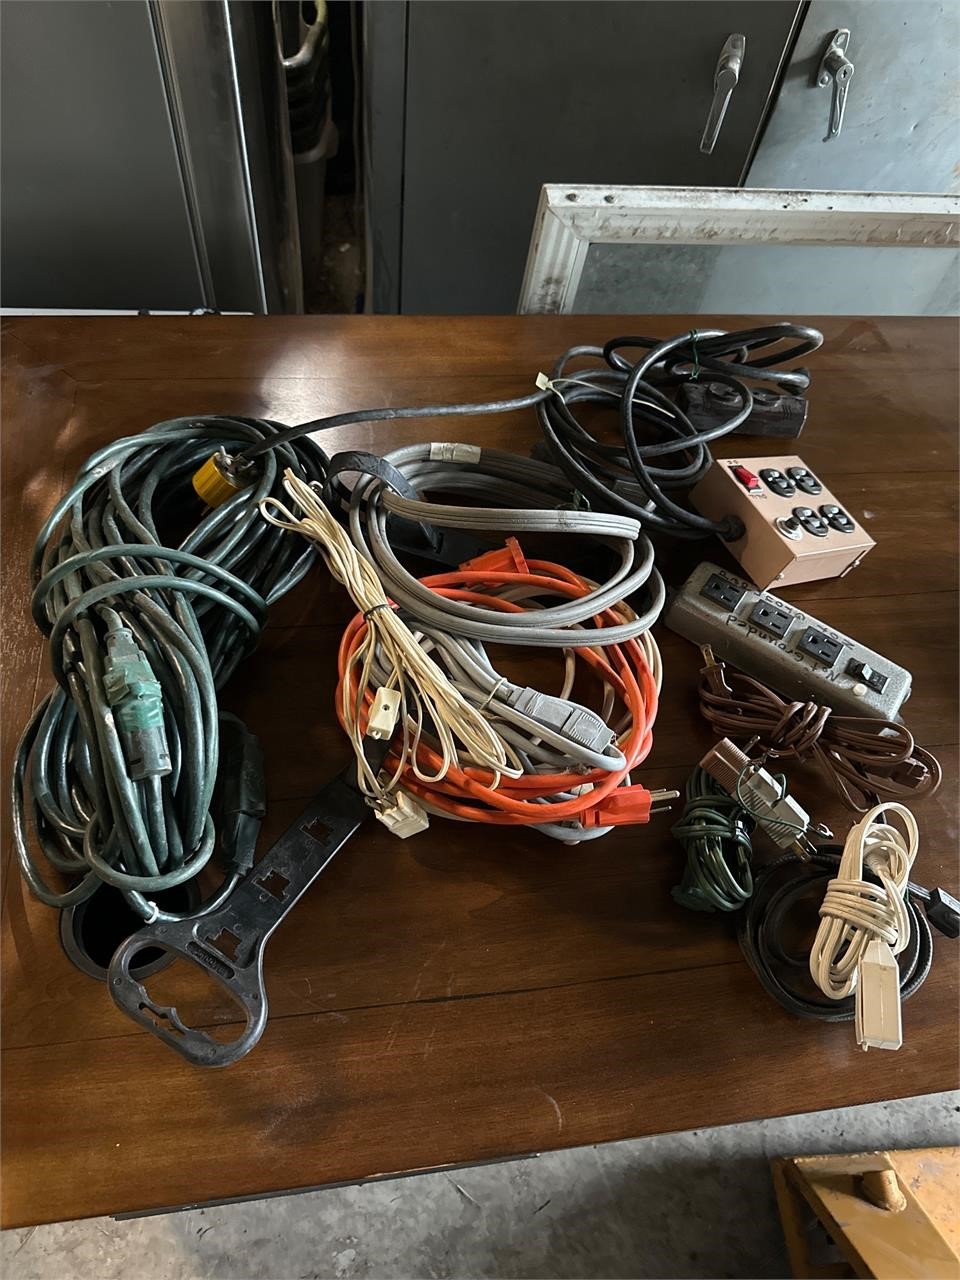 Electrical Cords & extension cords with multi taps